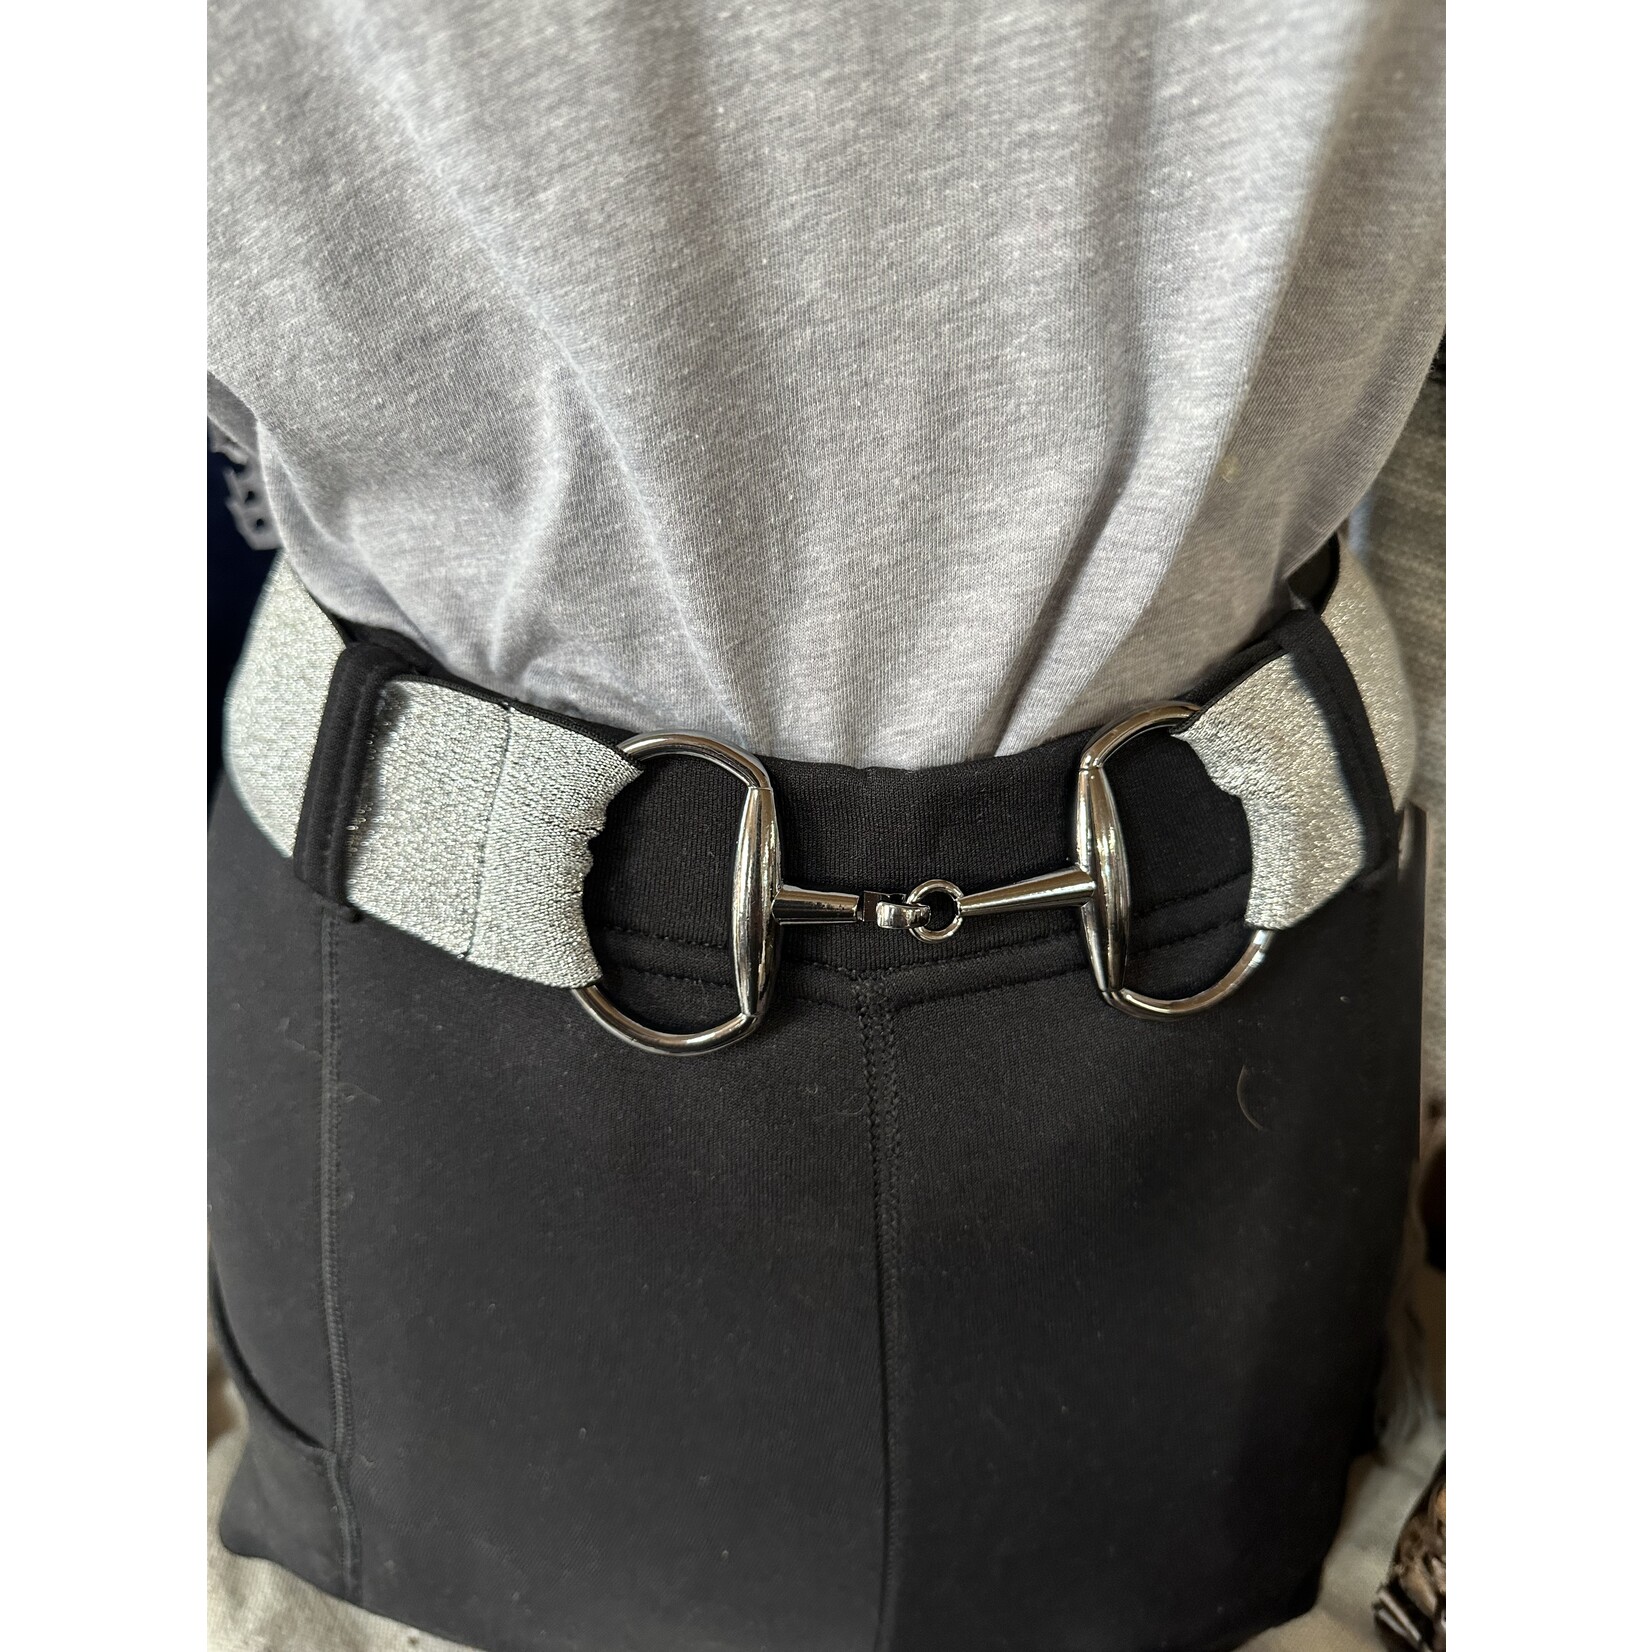 Anytime Tack Anytime Tack Essential Riding Belt